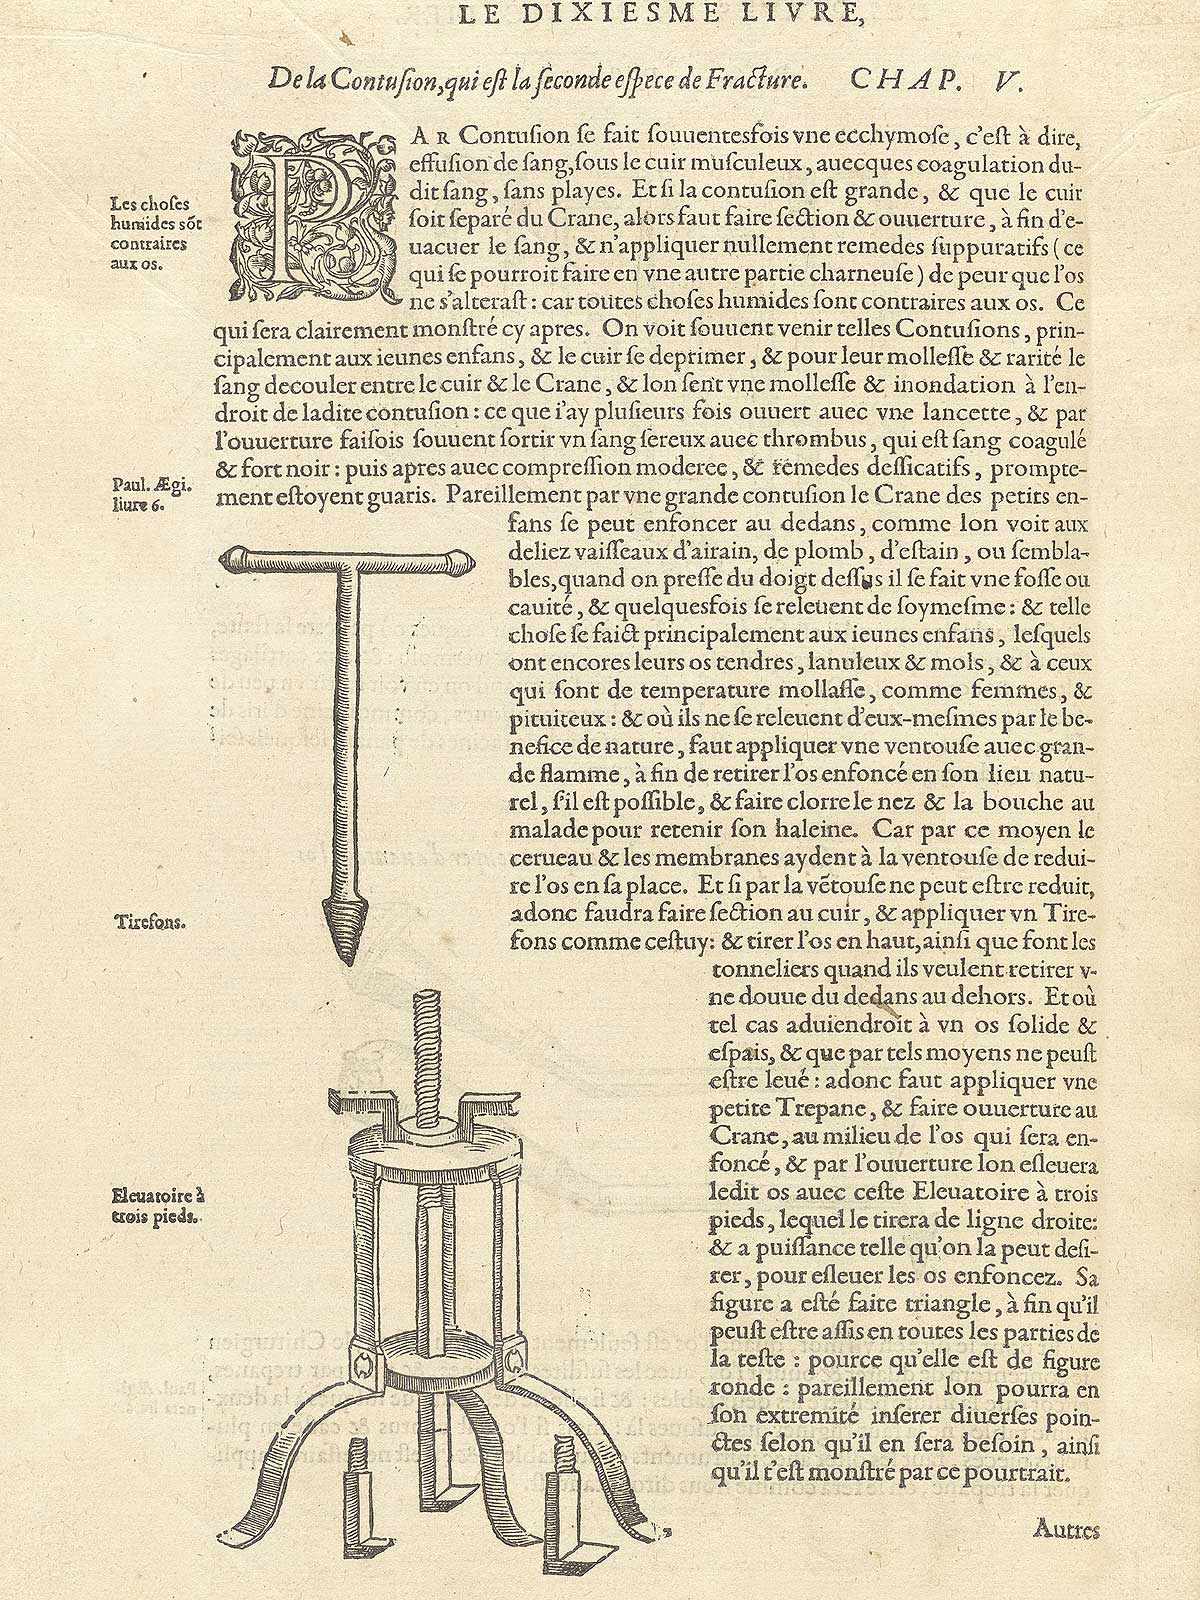 Page CCCLII which features a large screw with handle and an elevator with three feets on the side of the text.